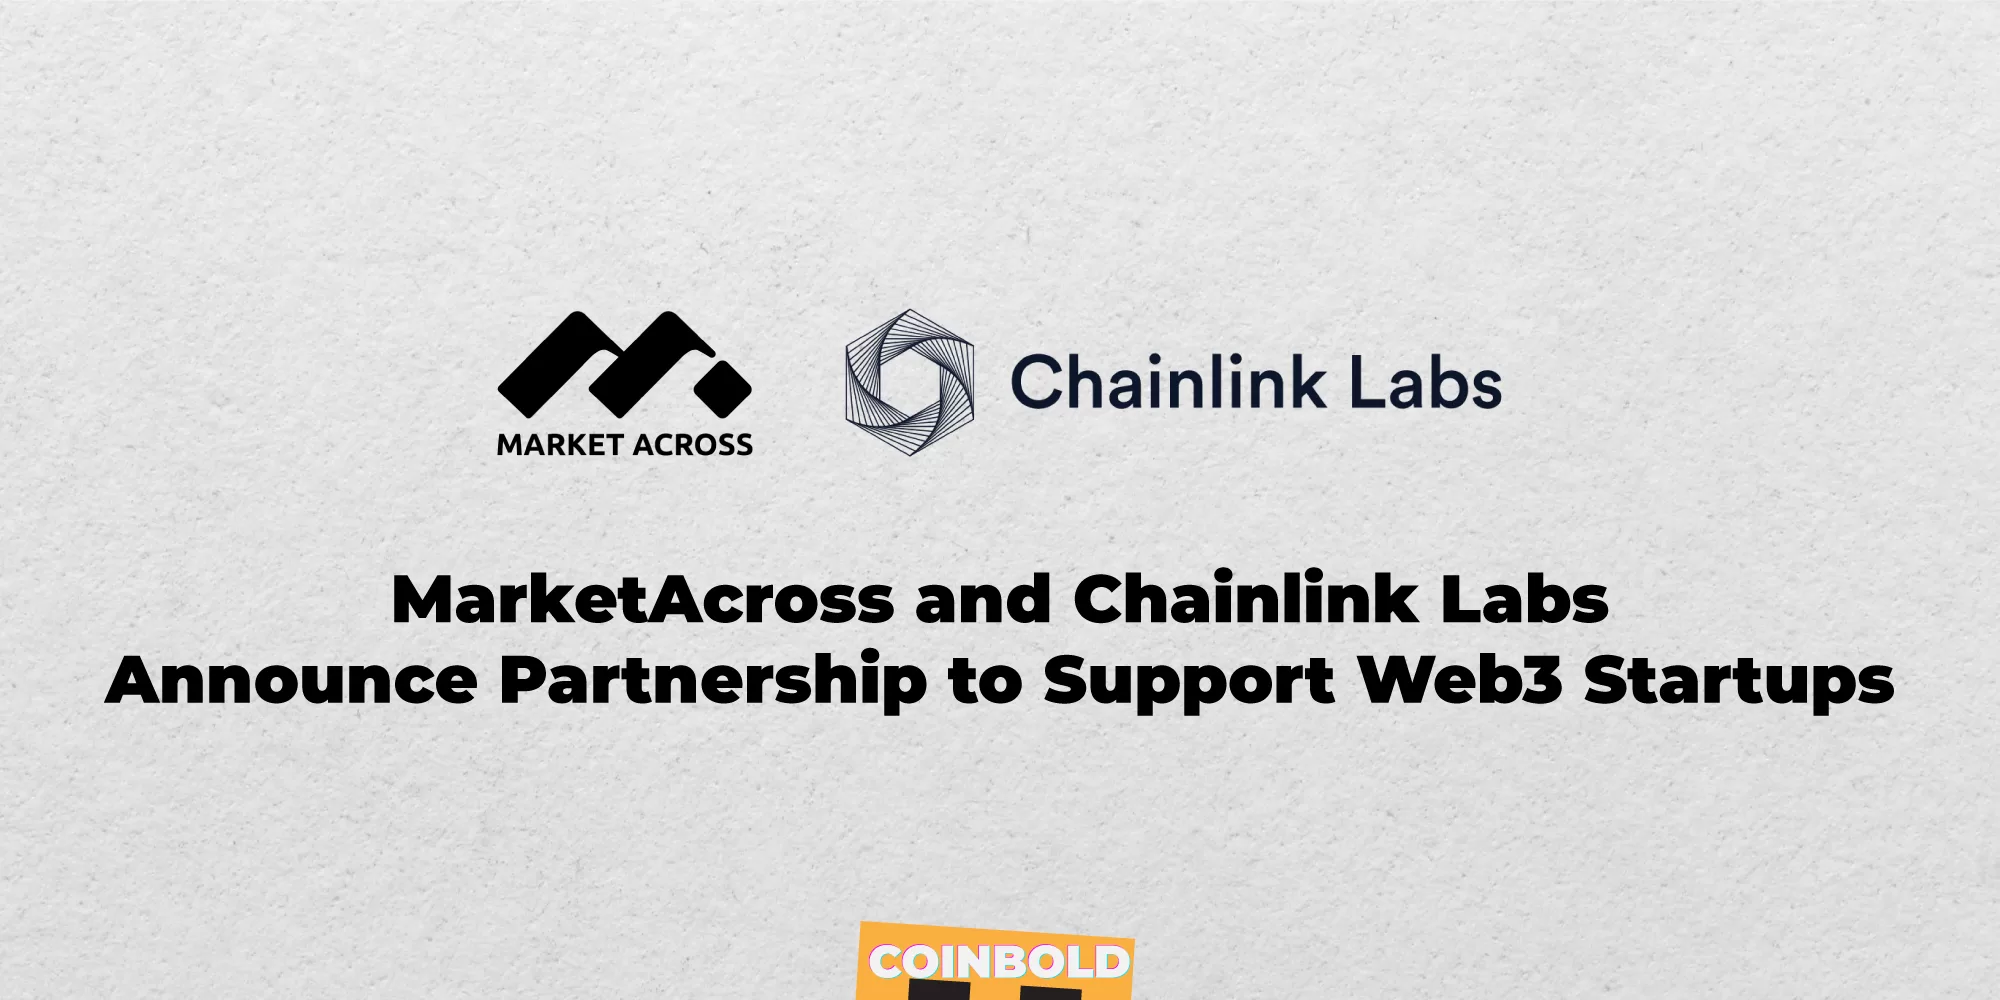 MarketAcross and Chainlink Labs Announce Partnership to Support Web3 Startups